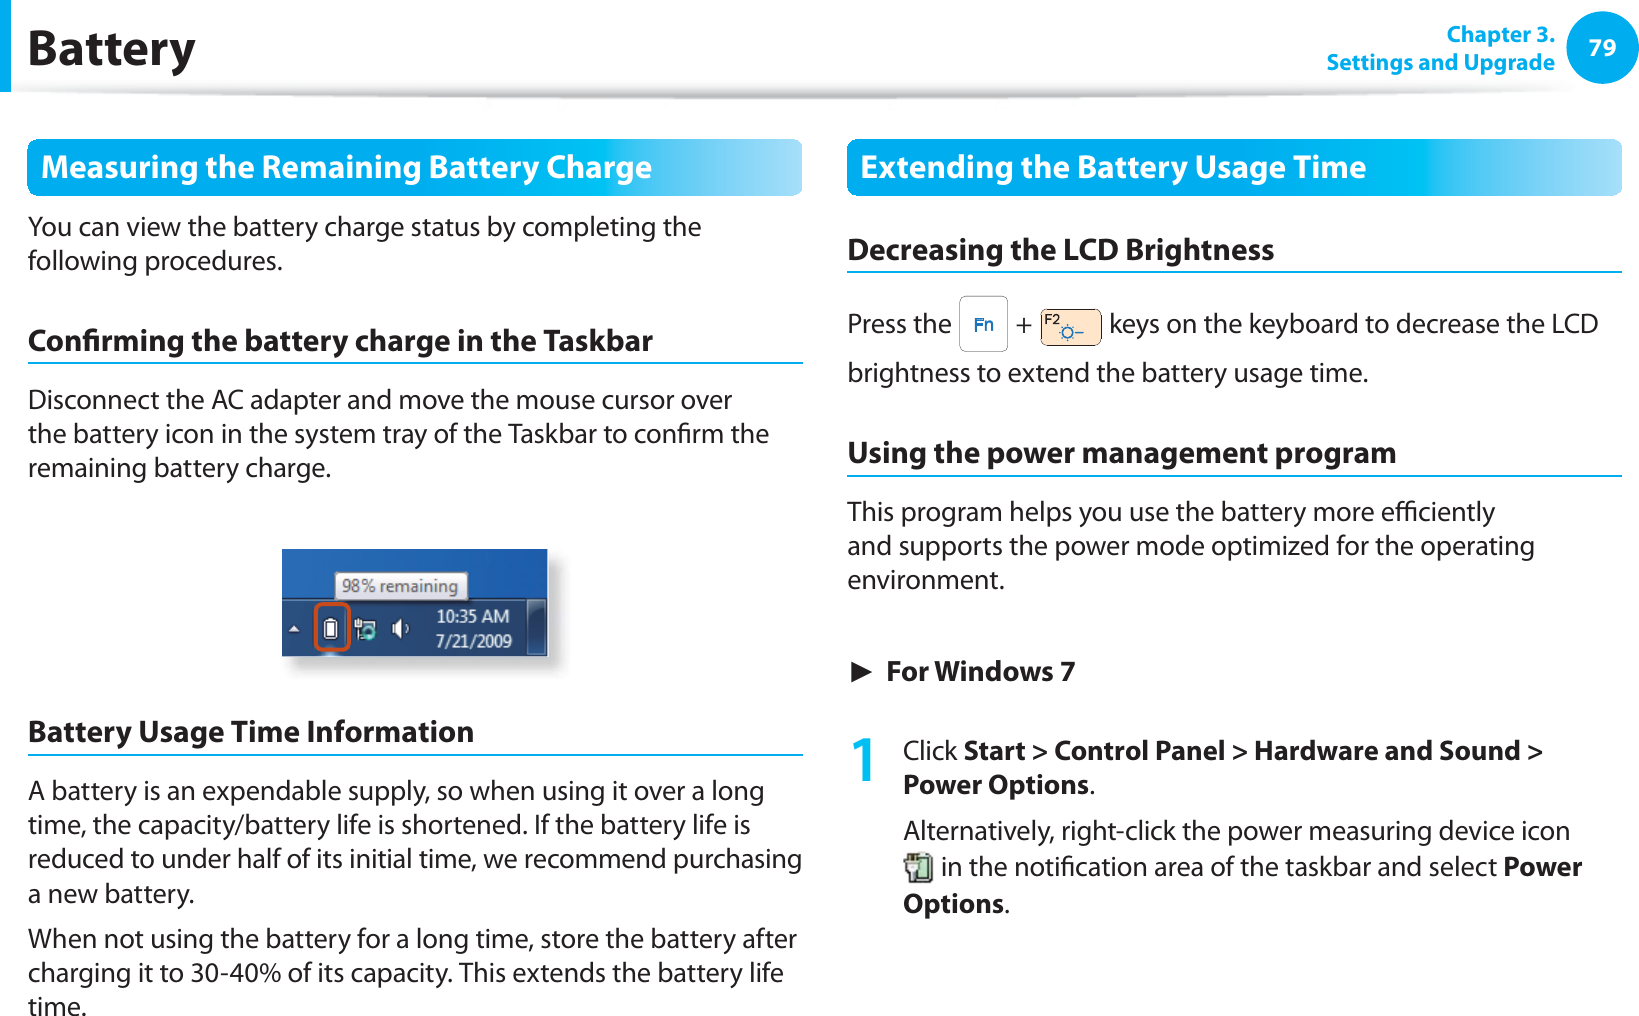 79 Chapter  3.Settings and UpgradeBatteryMeasuring the Remaining Battery ChargeYou can view the battery charge status by completing the following procedures.Con rming the battery charge in the TaskbarDisconnect the AC adapter and move the mouse cursor over the battery icon in the system tray of the Taskbar to con rm the remaining battery charge.Battery Usage Time InformationA battery is an expendable supply, so when using it over a long time, the capacity/battery life is shortened. If the battery life is reduced to under half of its initial time, we recommend purchasing a new battery.When not using the battery for a long time, store the battery after charging it to 30-40% of its capacity. This extends the battery life time.Extending the Battery Usage TimeDecreasing the LCD BrightnessPress the   +   keys on the keyboard to decrease the LCD brightness to extend the battery usage time.Using the power management programThis program helps you use the battery more e  ciently and supports the power mode optimized for the operating environment.► For Windows 71 Click Start &gt; Control Panel &gt; Hardware and Sound &gt; Power Options.Alternatively, right-click the power measuring device icon  in the noti cation area of the taskbar and select Power Options.